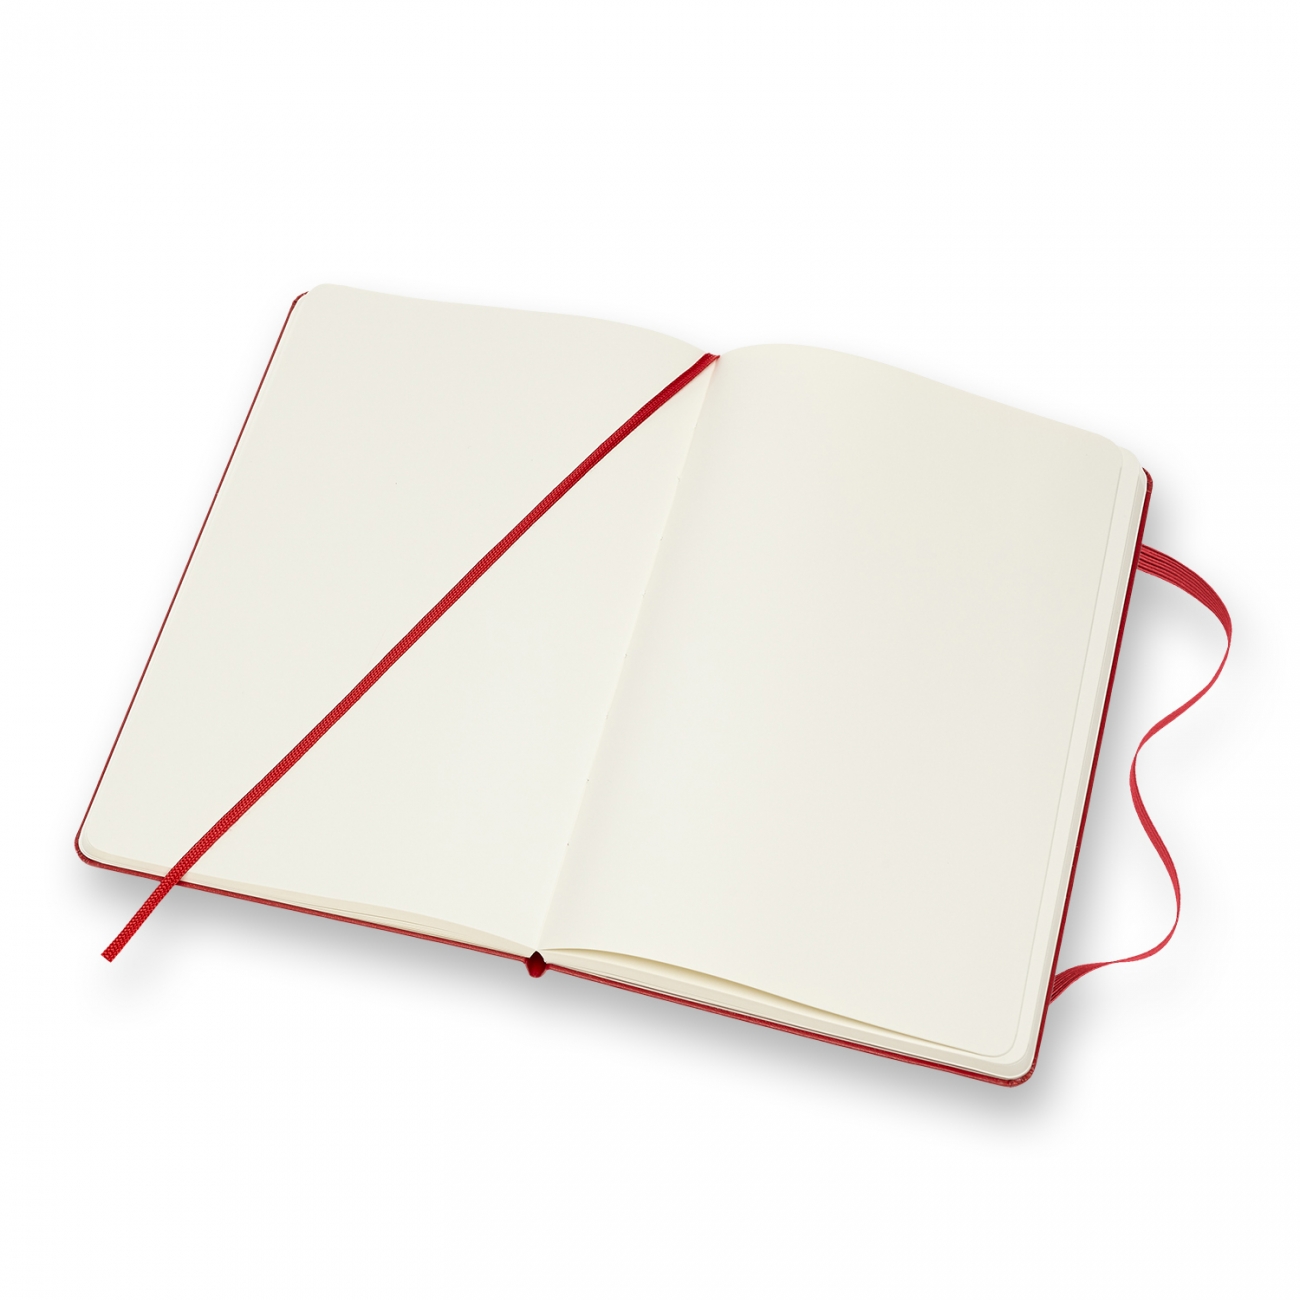 CLASSIC HARD COVER NOTEBOOK - PLAIN - LARGE - SCARLET RED